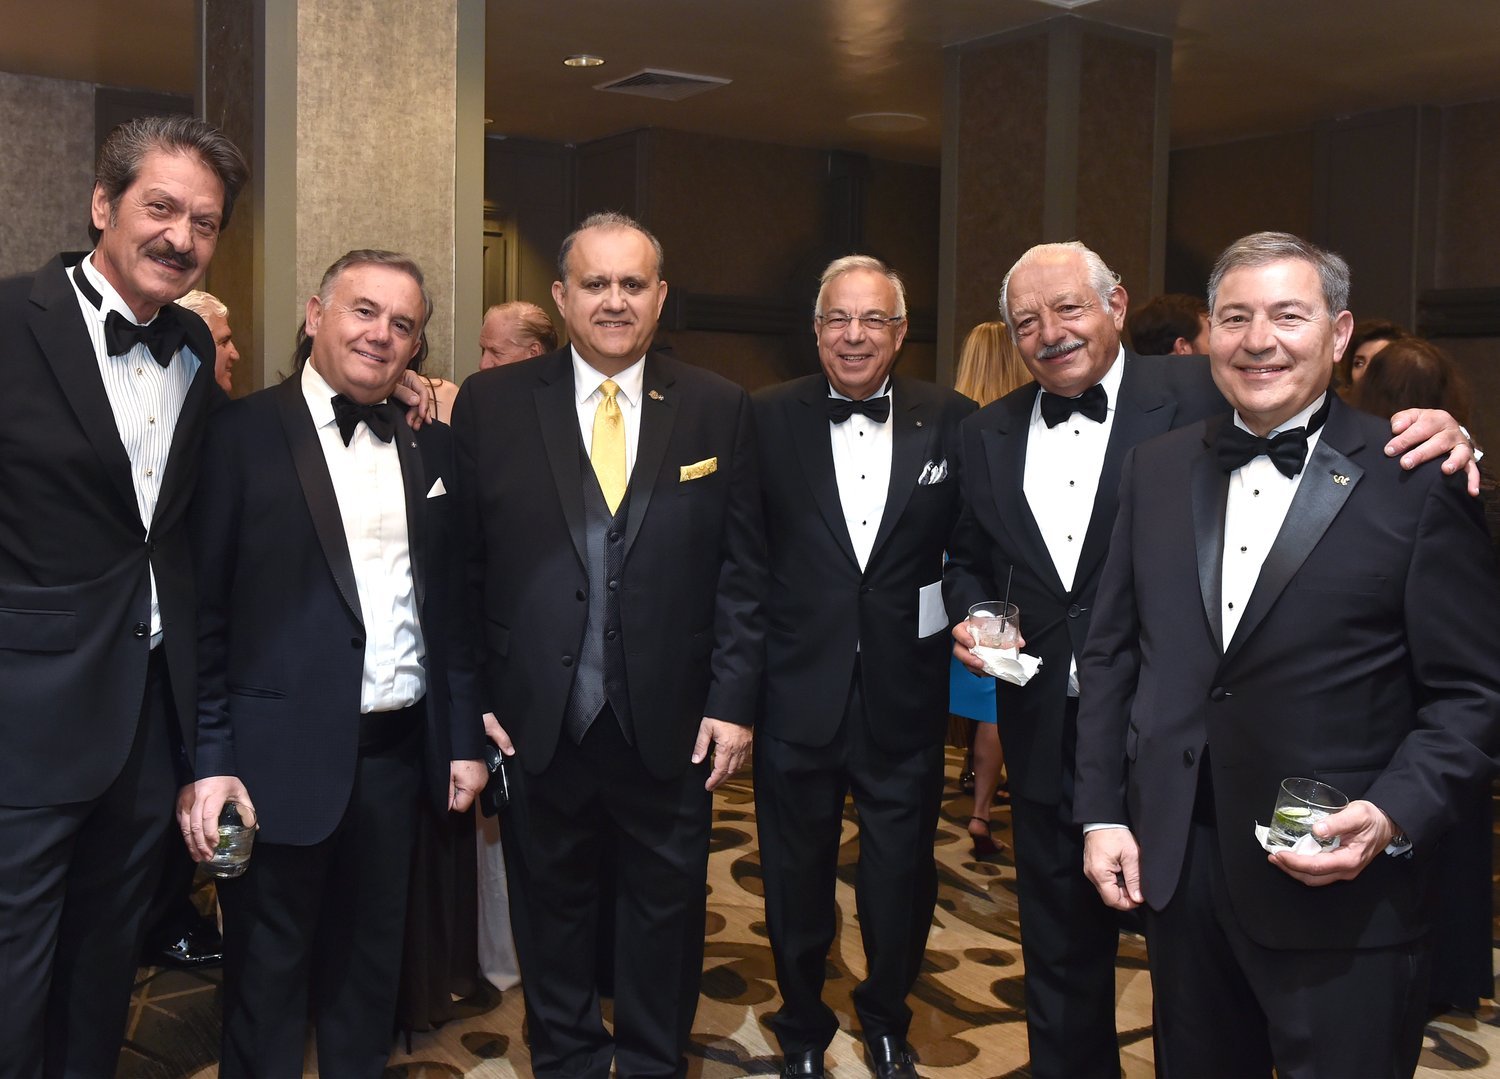  AHI President Nick Larigakis, Board Members, Supporters, and Friends during the 50th Anniversary Hellenic Heritage and National Public Service Awards. 